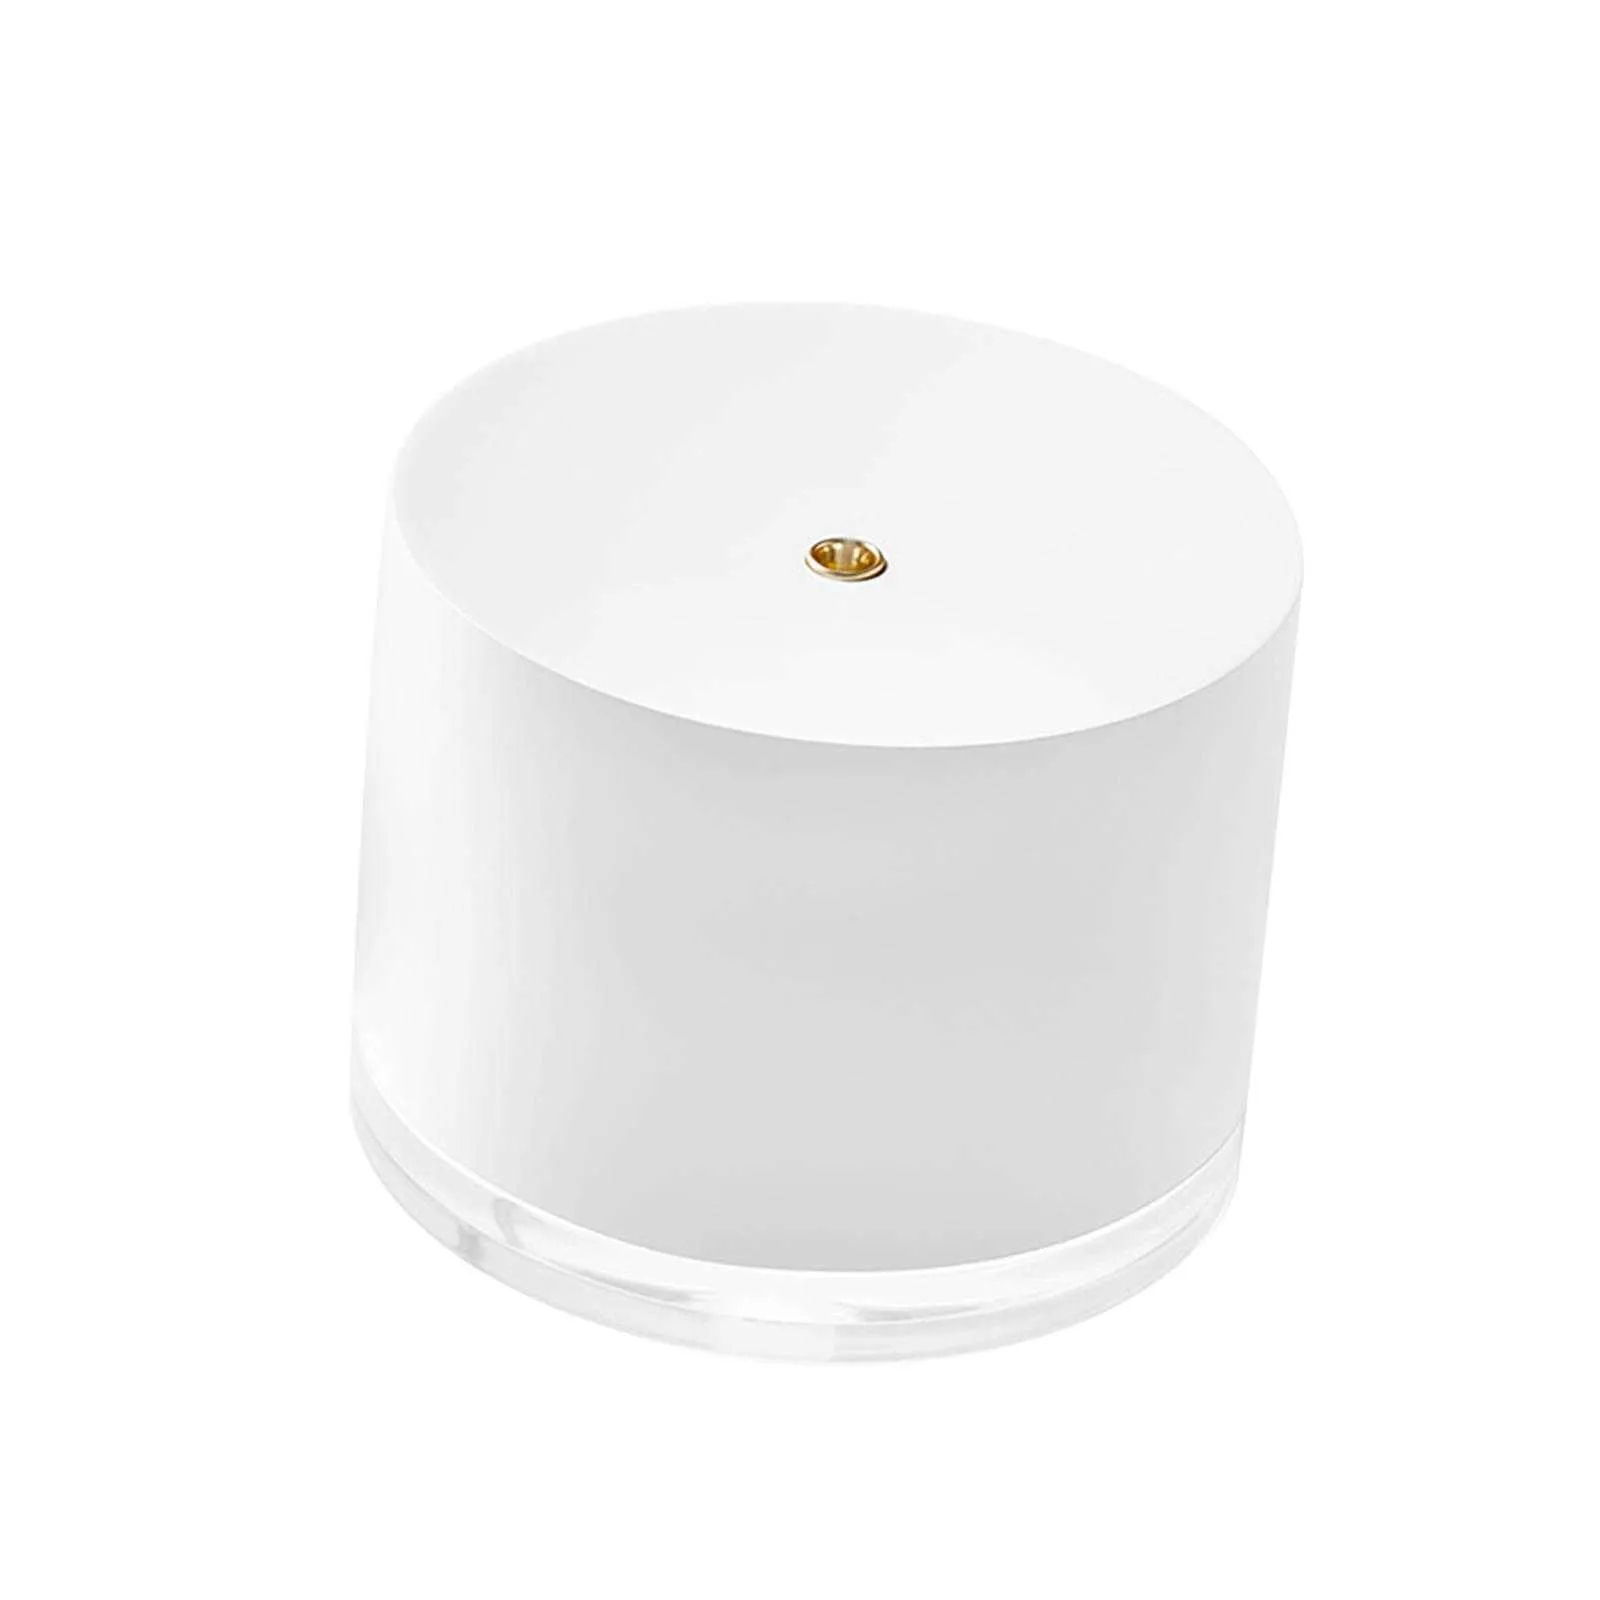 Air Humidifier, Humidifiers for Bedroom, Desktop Humidifier Essential Oil Diffuser for Tabletop